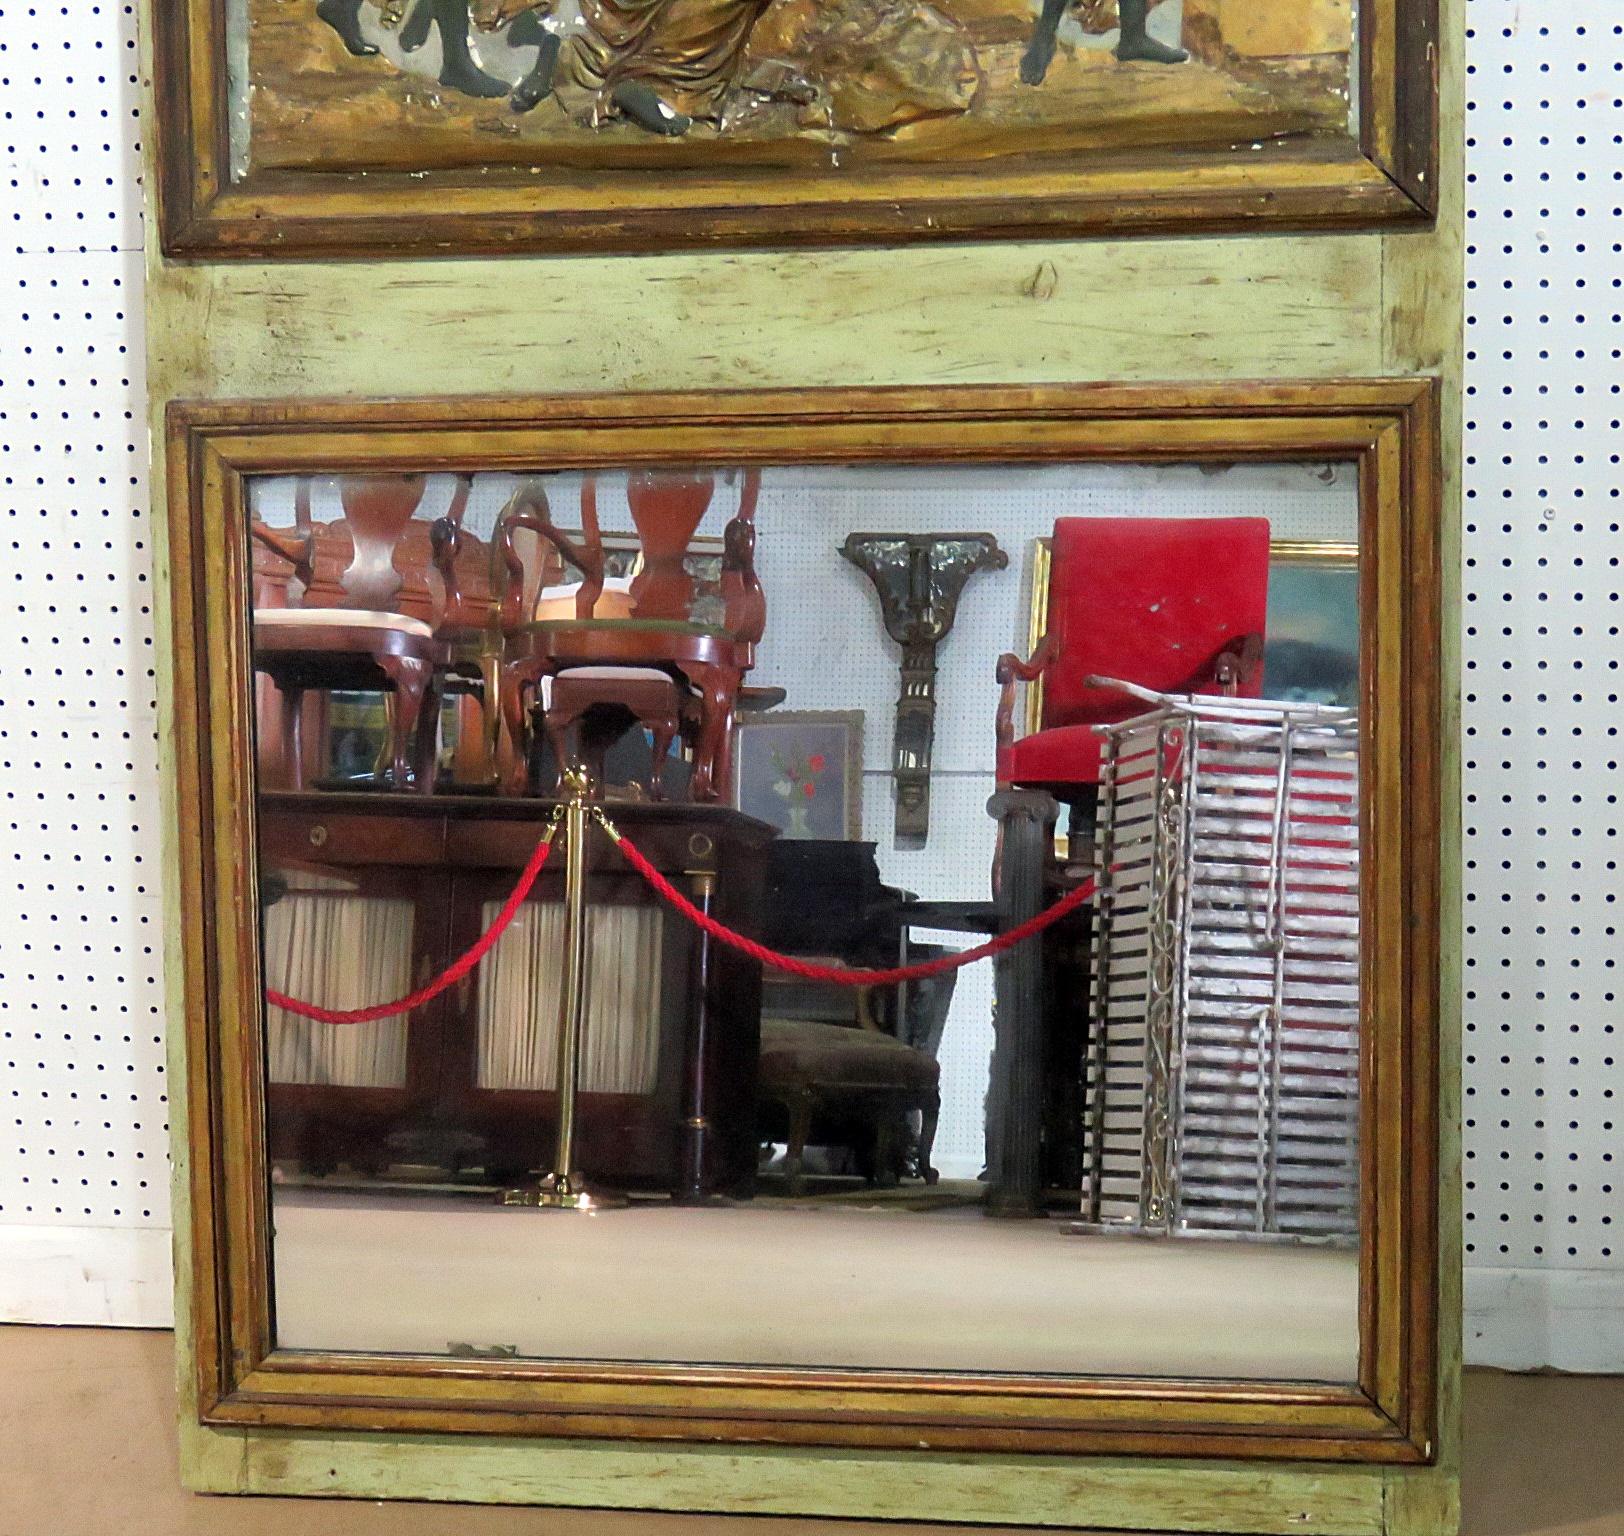 This is an antique mirror made around the turn of the last century and depicts what appears to be a plaster scene of painted Roman statues. The mirror is in its original condition and can be redone if neccessary but has character just the way it is. 